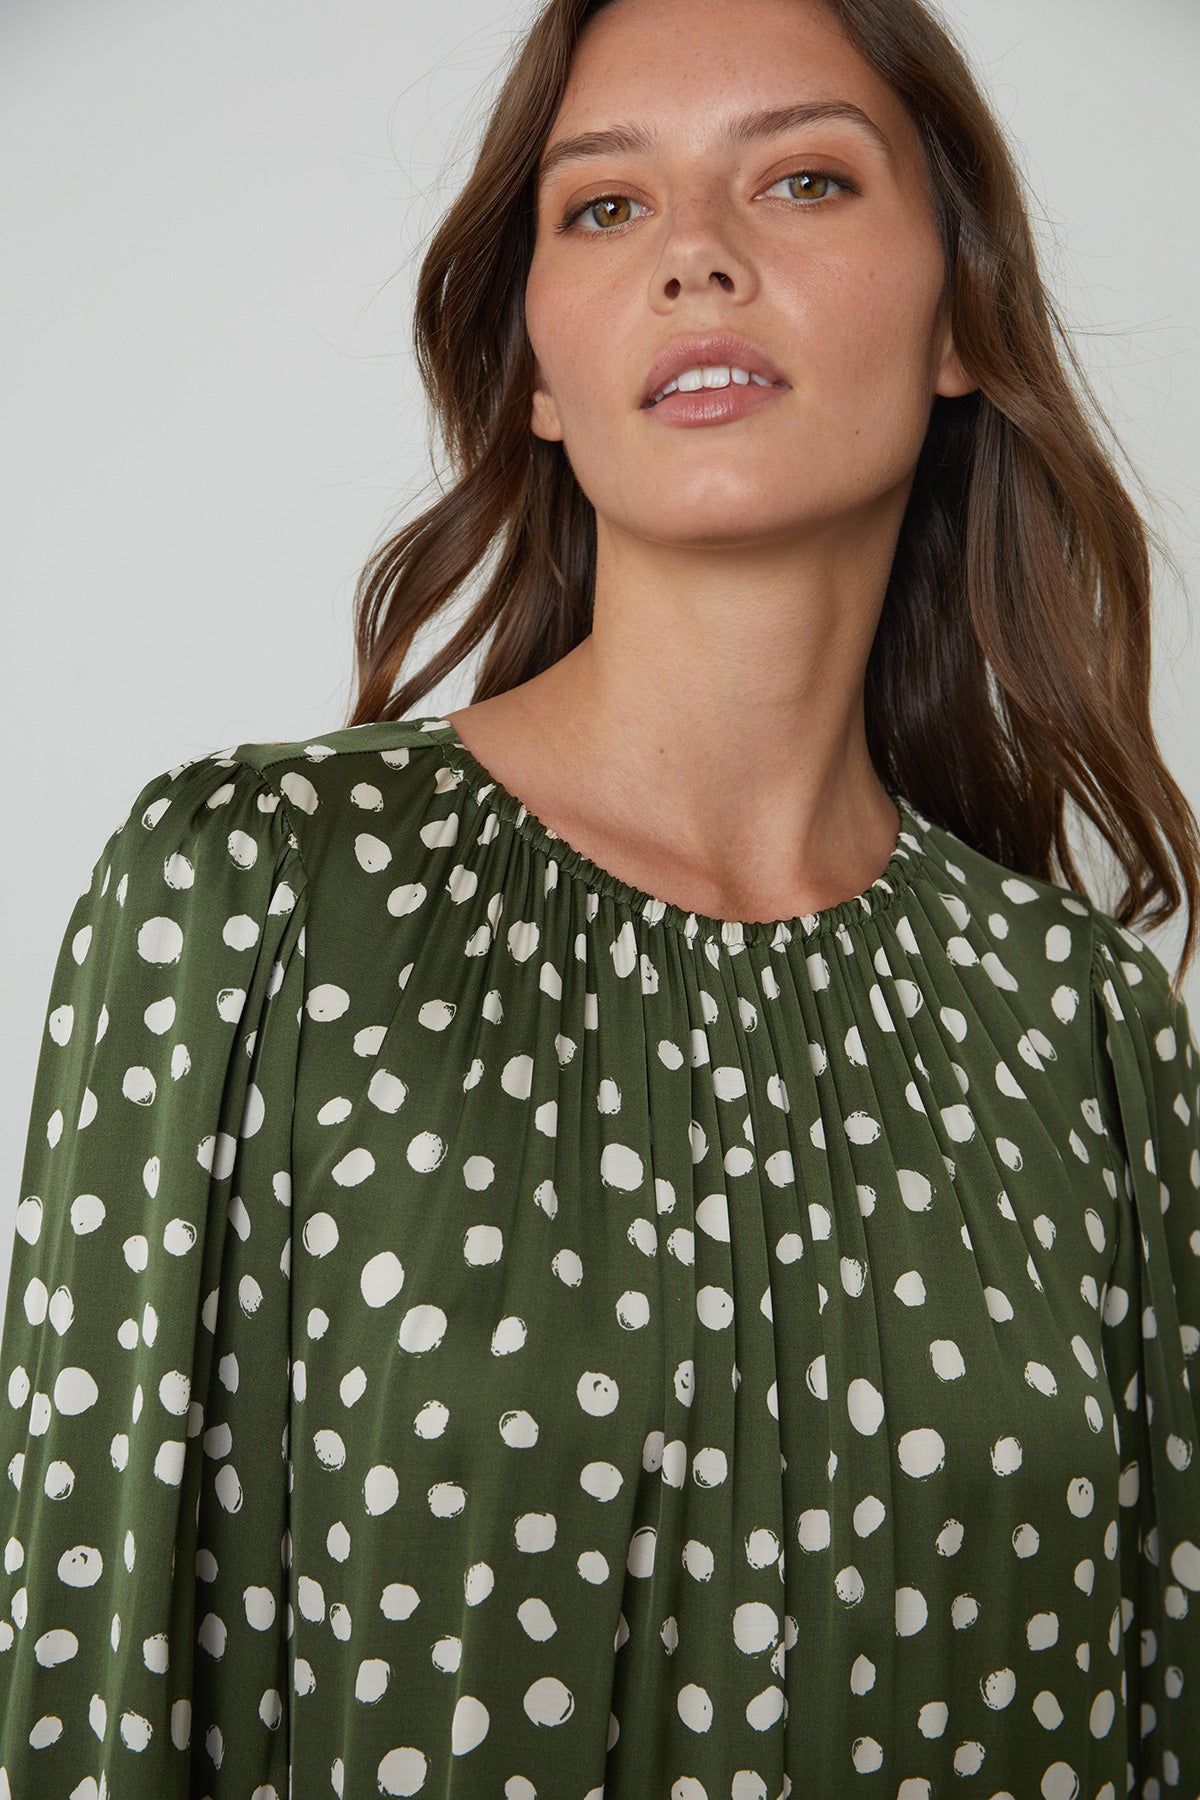 Kenia Polka Dot Dress with Green Background and Cream Dots Neckline detail-25078342123713